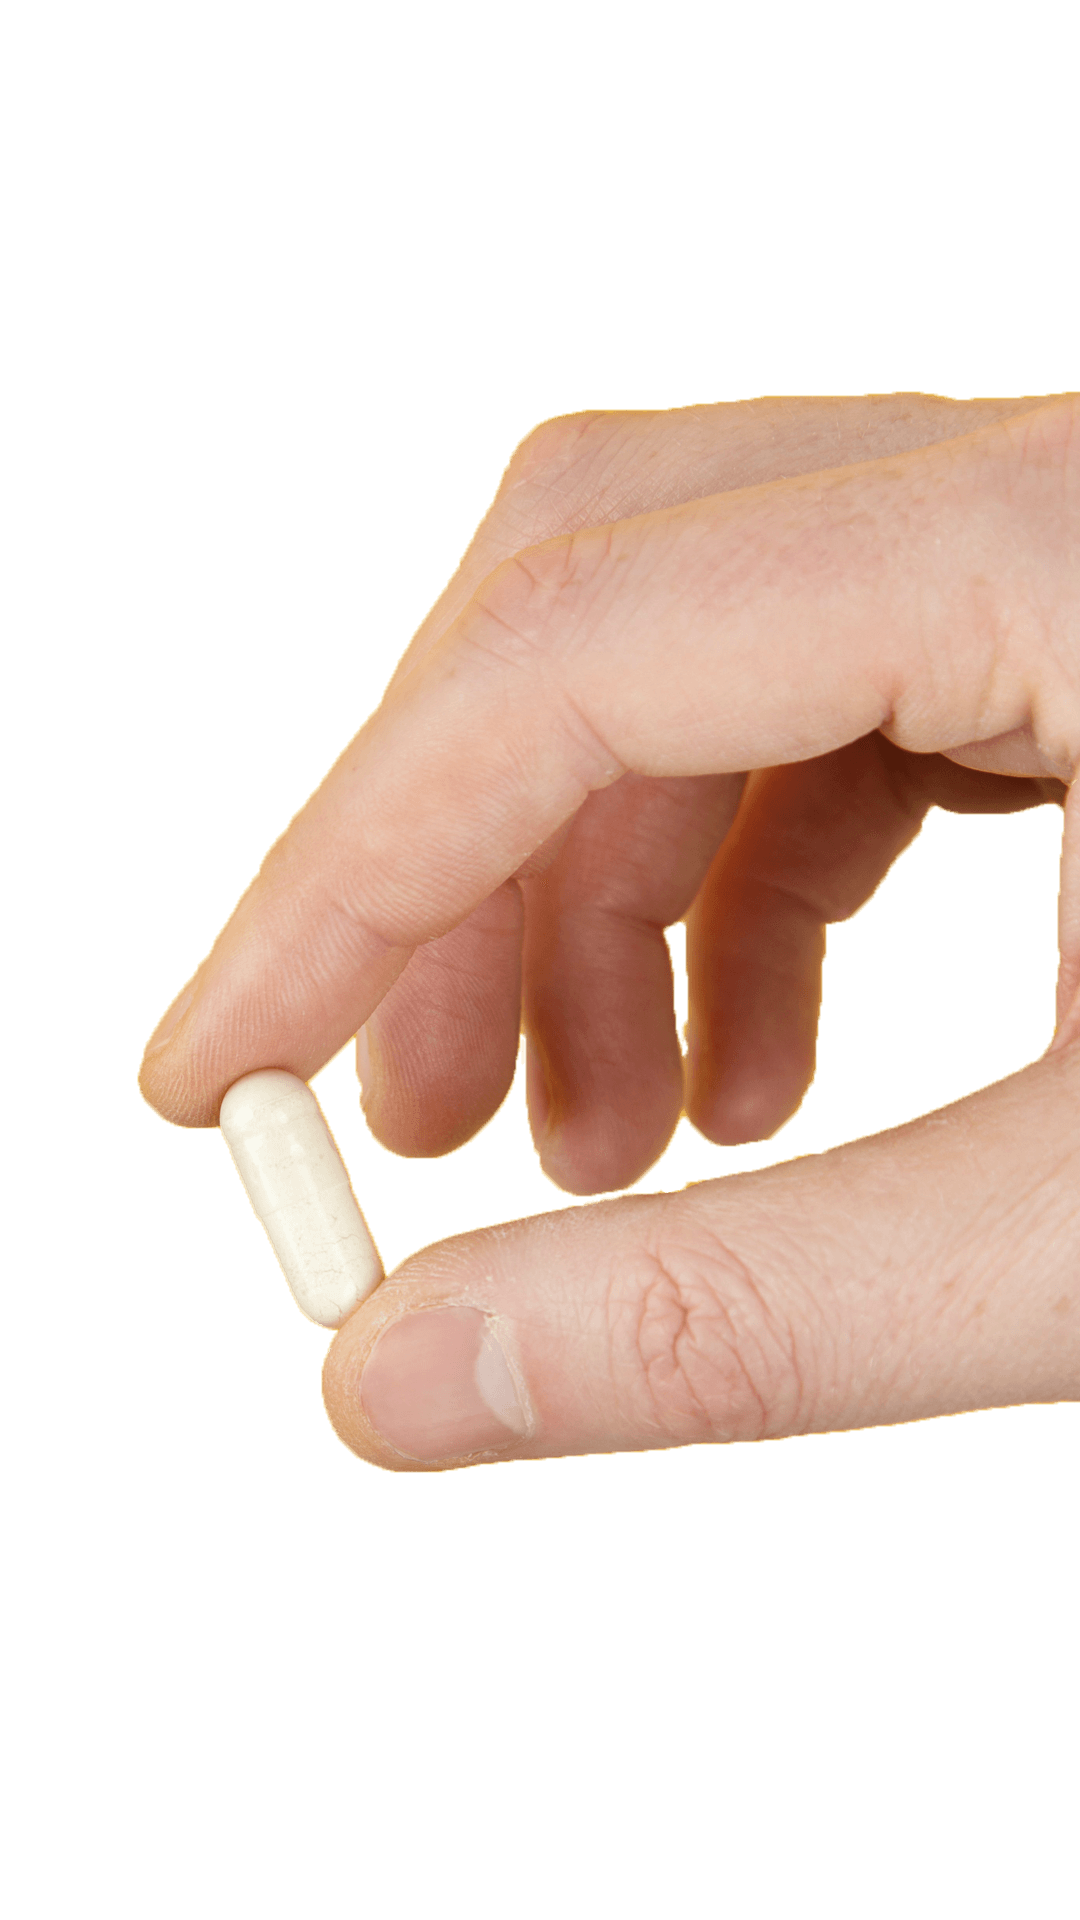 A pill in someones hand